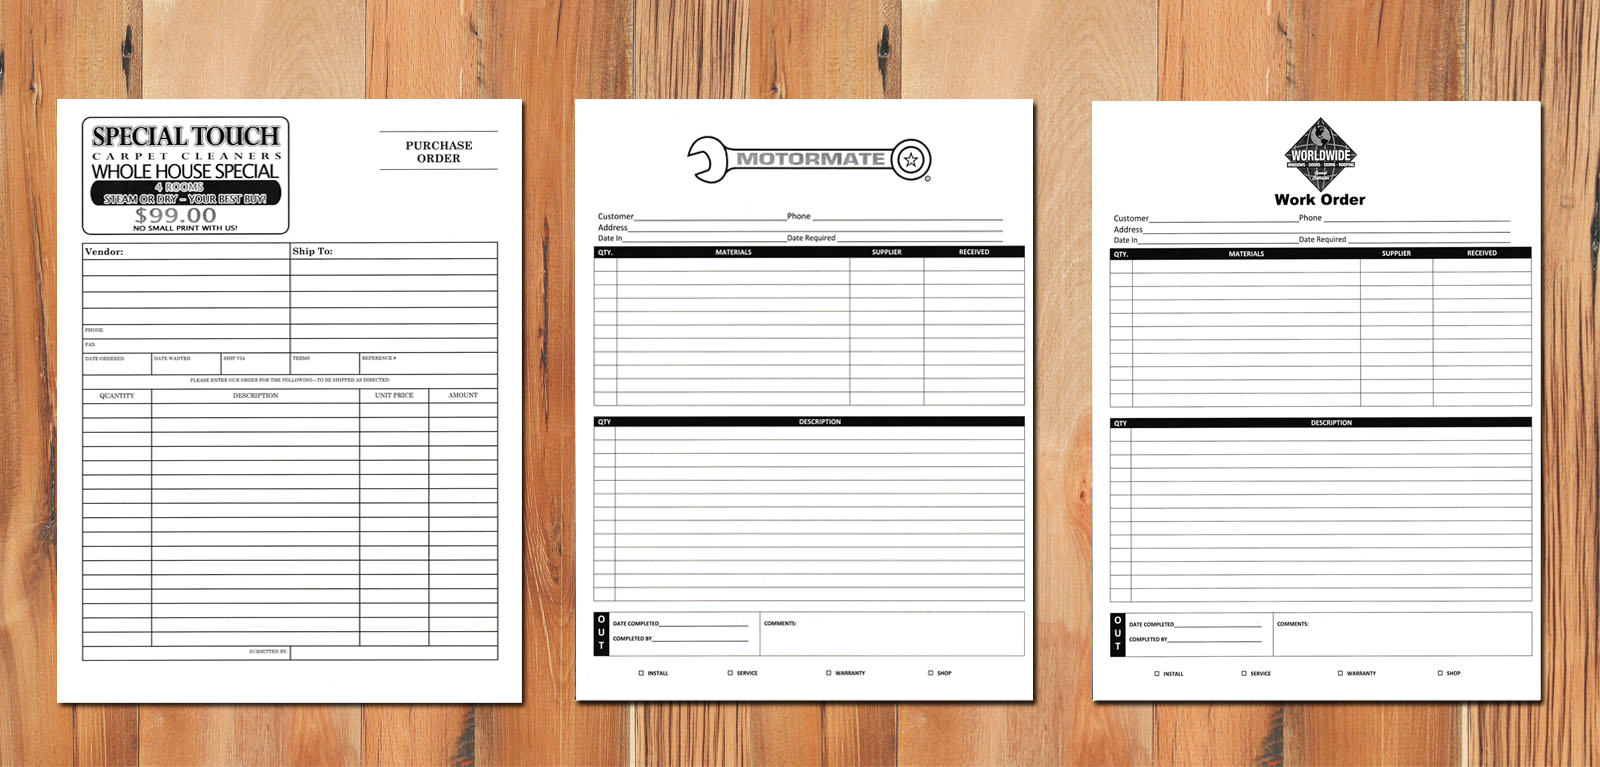 3 part invoices, invoice, custom carbon copy forms, invoice printing, carbonless forms, invoice book, custom ncr forms